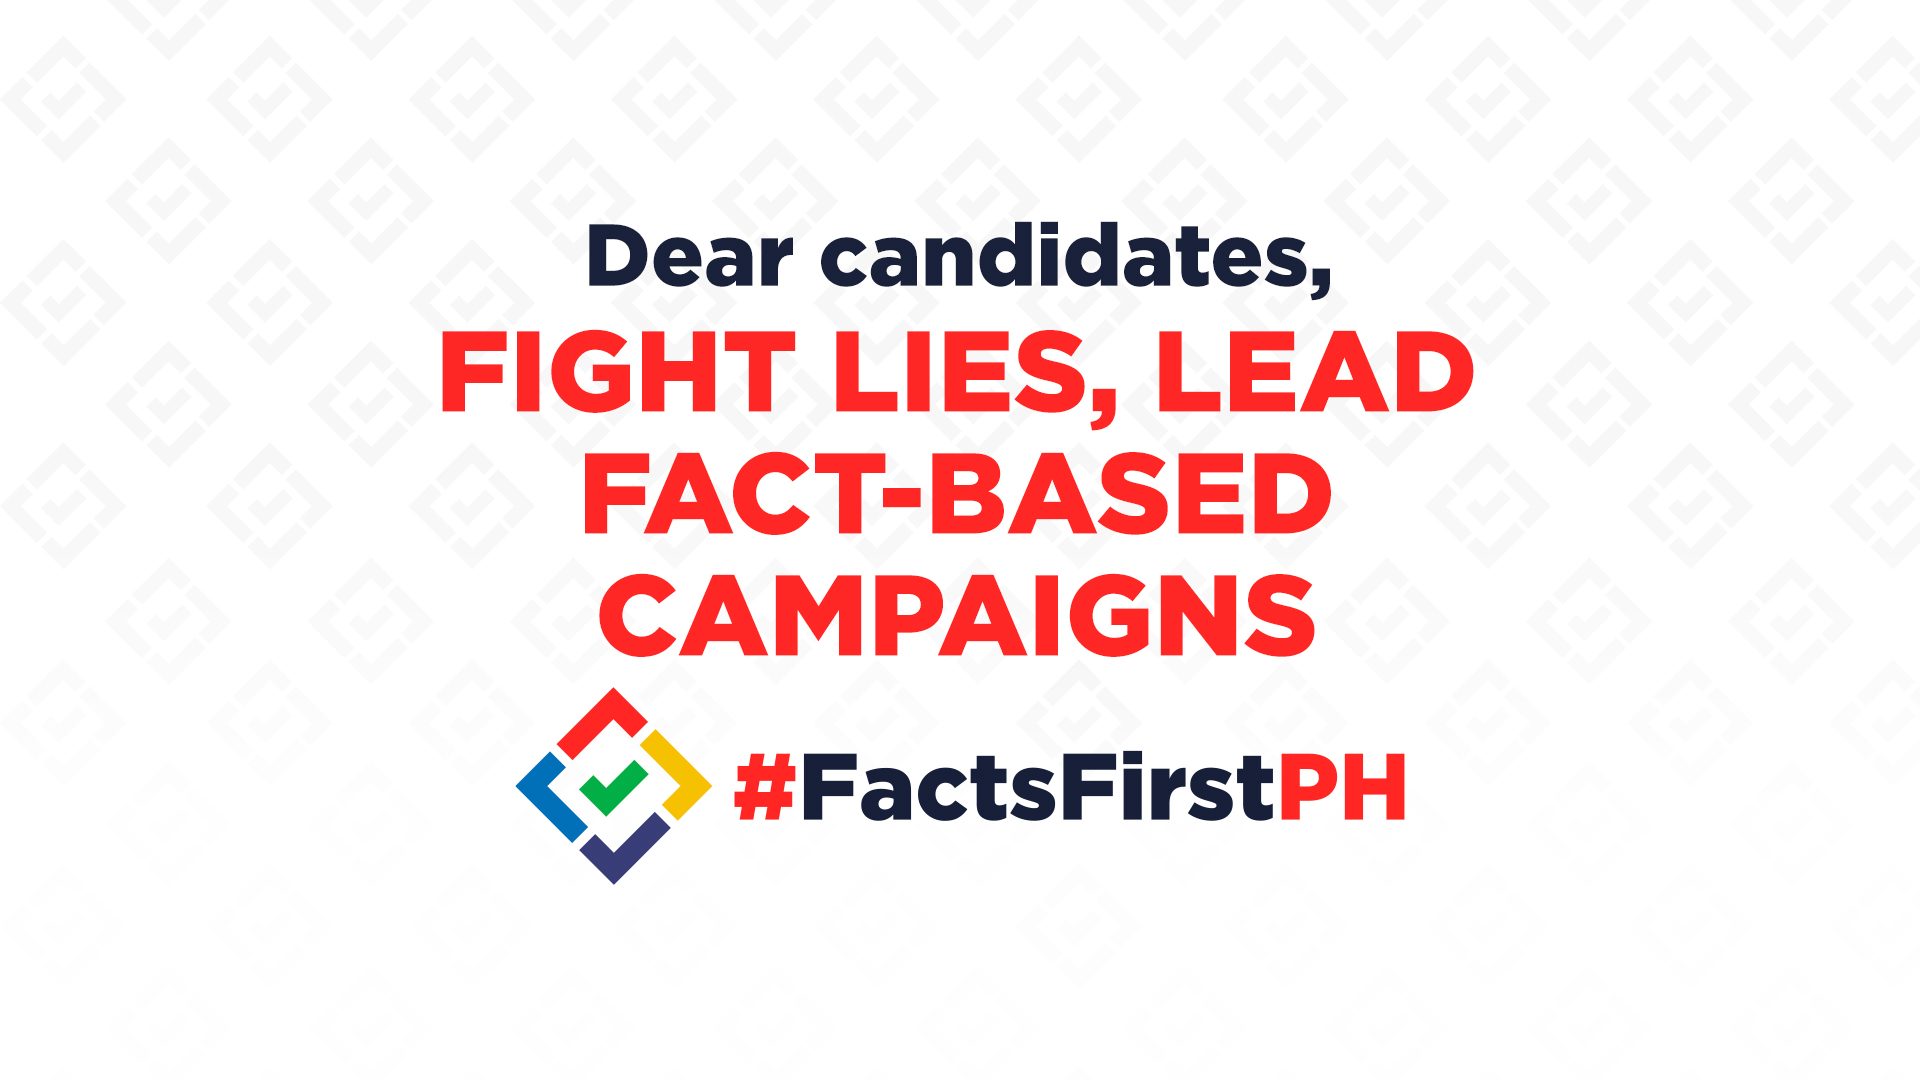 #FactsFirstPH calls on candidates to fight lies, lead fact-based campaigns